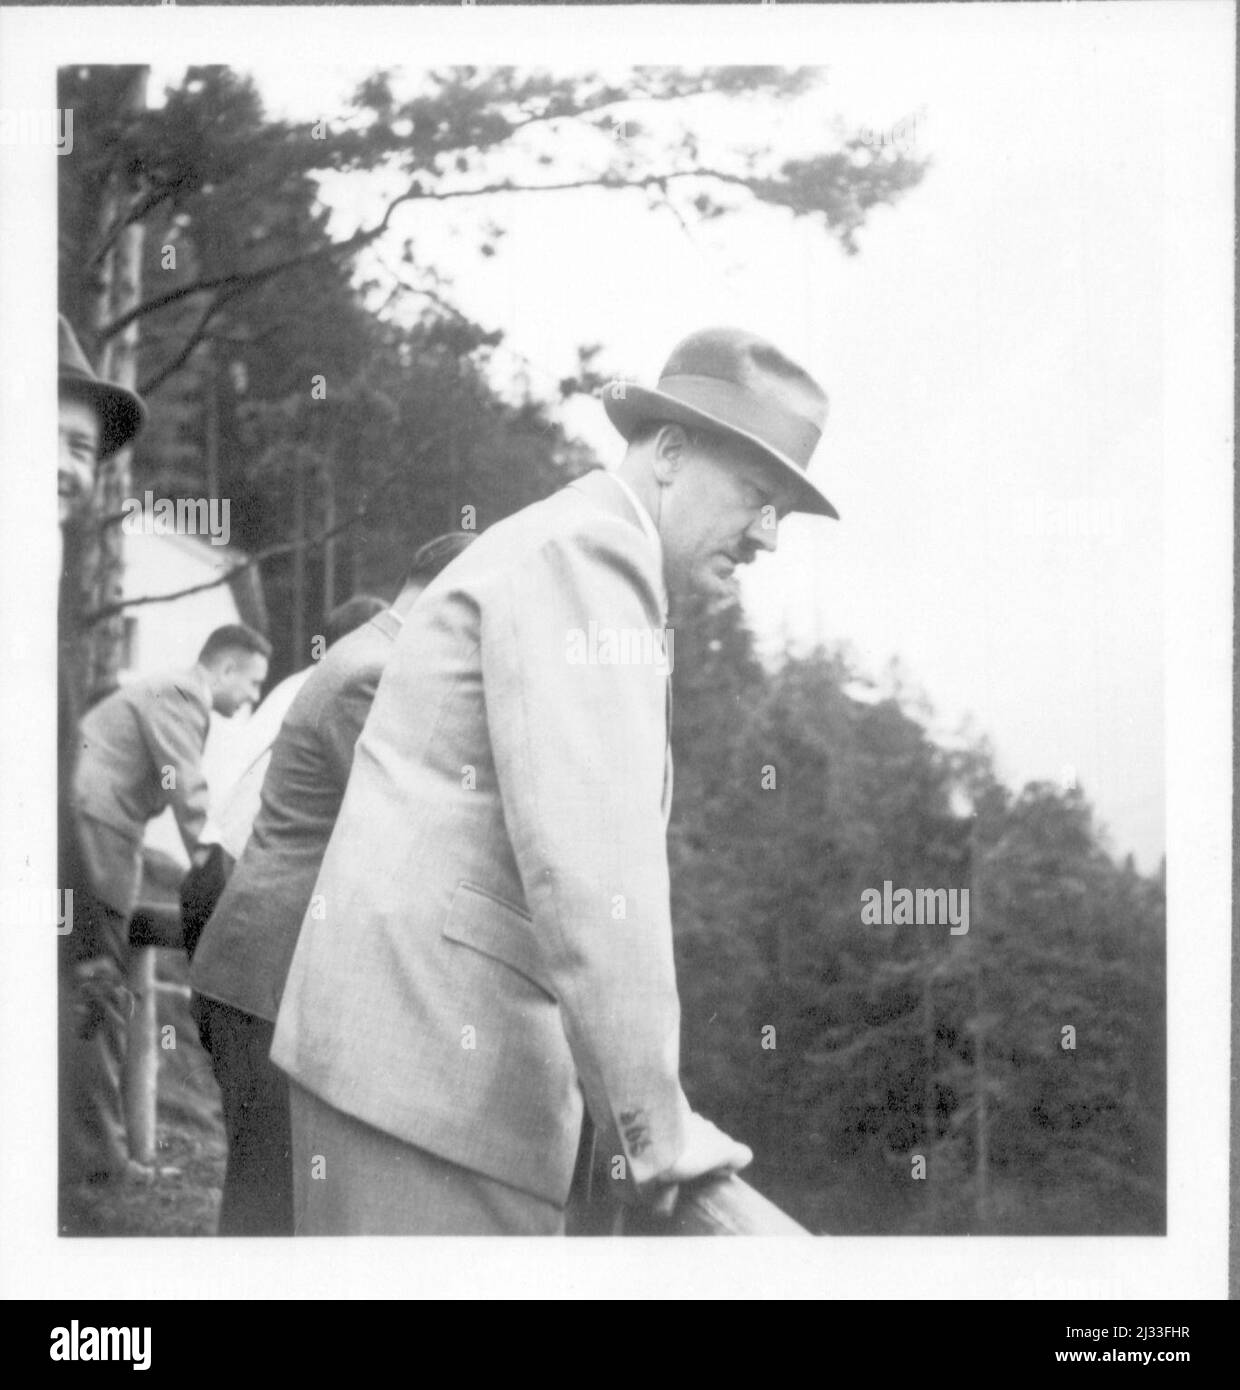 Besuch Gauleiter Wagner 1936. Eva Braun's Photo Albums, ca. 1913 - ca. 1944. These albums are attributed to Eva Braun (four are claimed by her friend Herta Schneider, nee Ostermeyer) and document her life from ca. 1913 to 1944. There are many photographs of Eva, her sisters and their children, Herta Schneider and her children, as well as photographs of Eva's vacations, family members and friends. Included also are photographs taken by and of Eva Braun at Hitler's chalet Berghof (or Kehlstein), photographs of Hitler and his entourage, visitors to Berghof and the scenery around Berchtesgaden, an Stock Photo